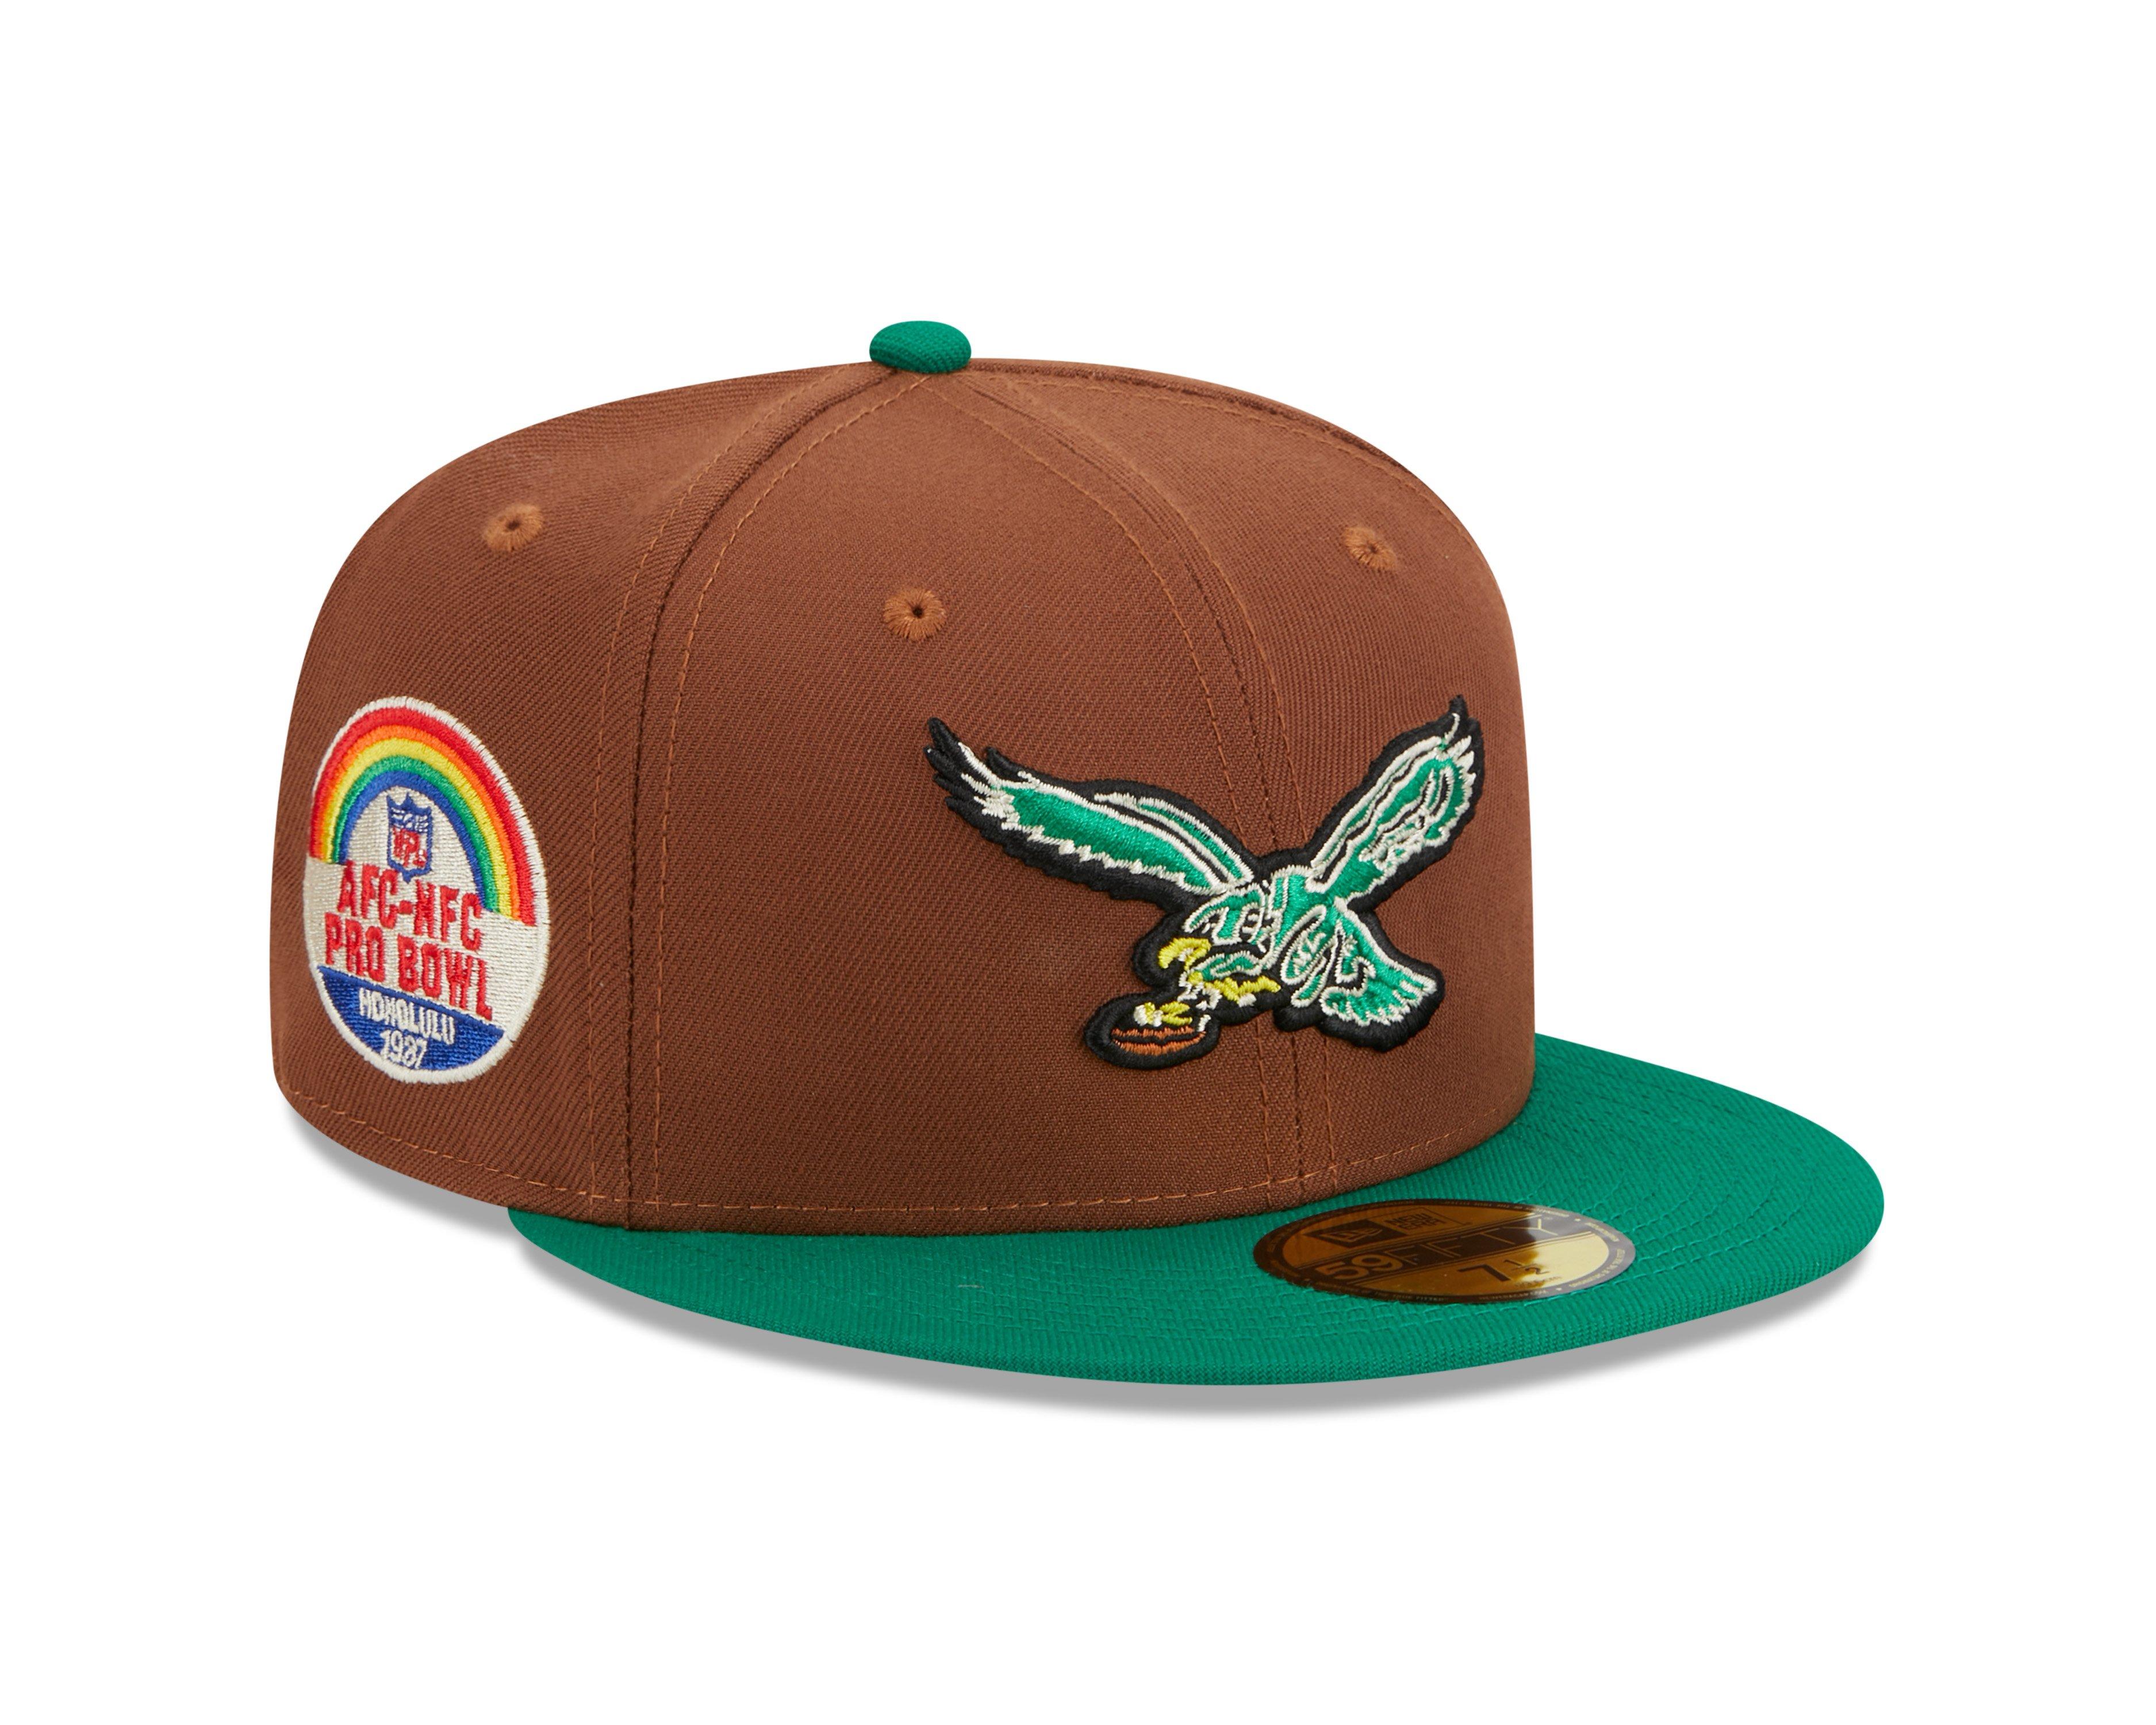 Philadelphia Eagles partner with New Era for 'FLY Collection